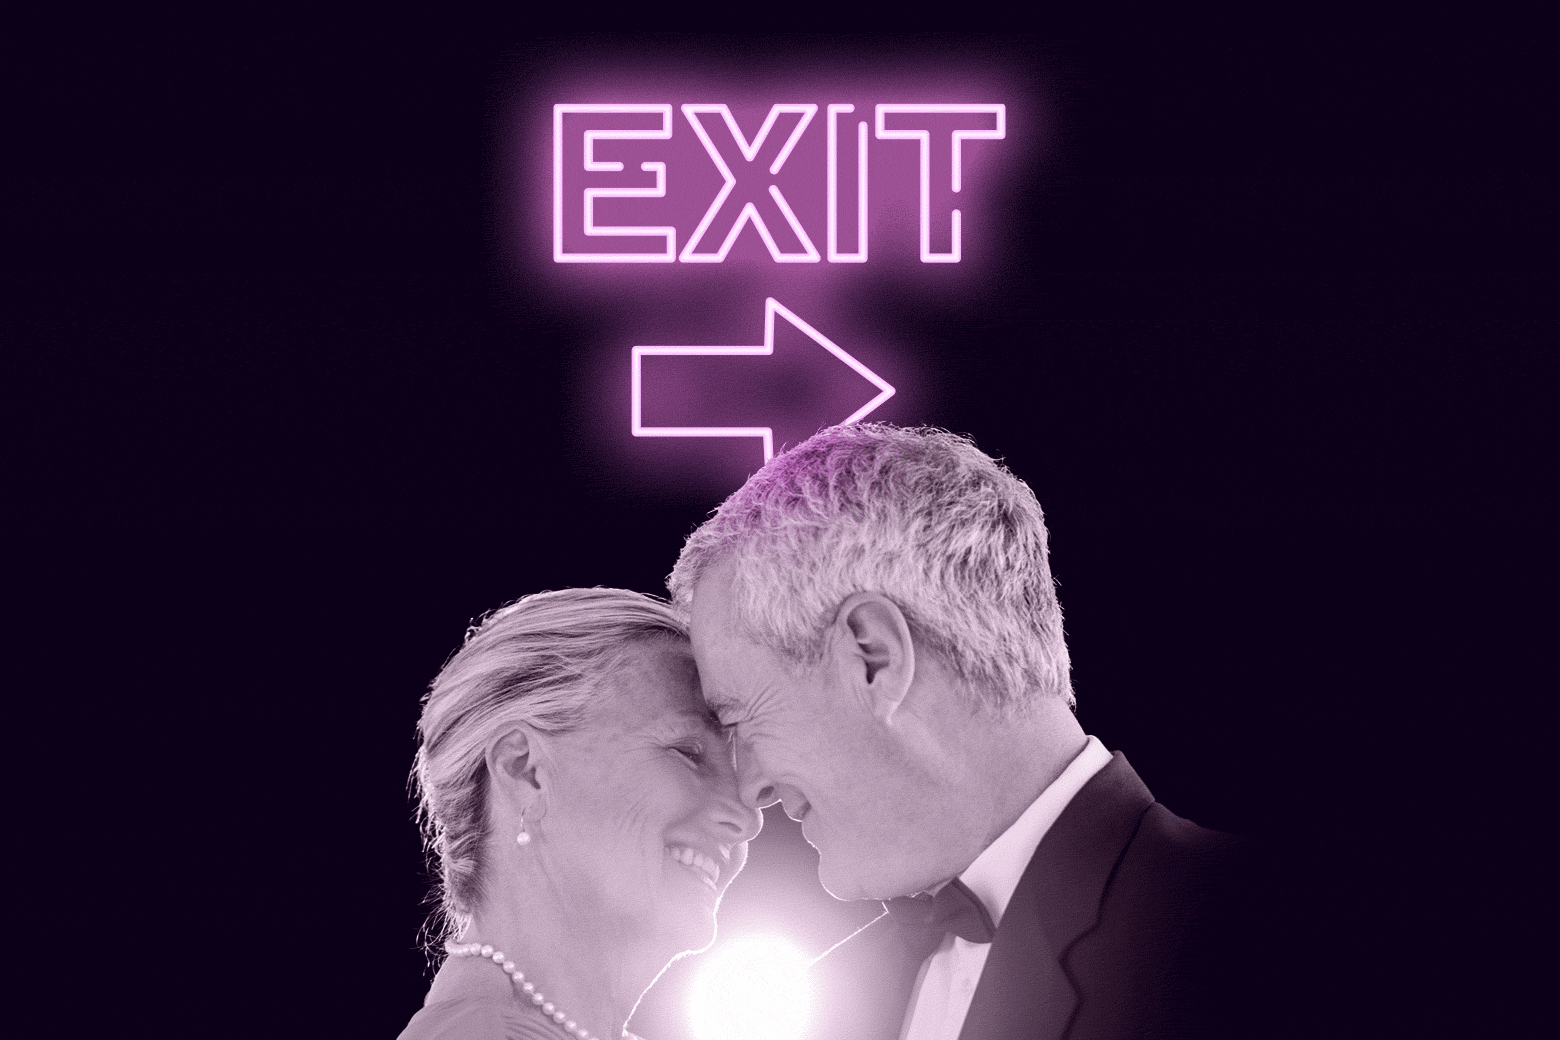 A straight couple kisses next to a neon exit sign.